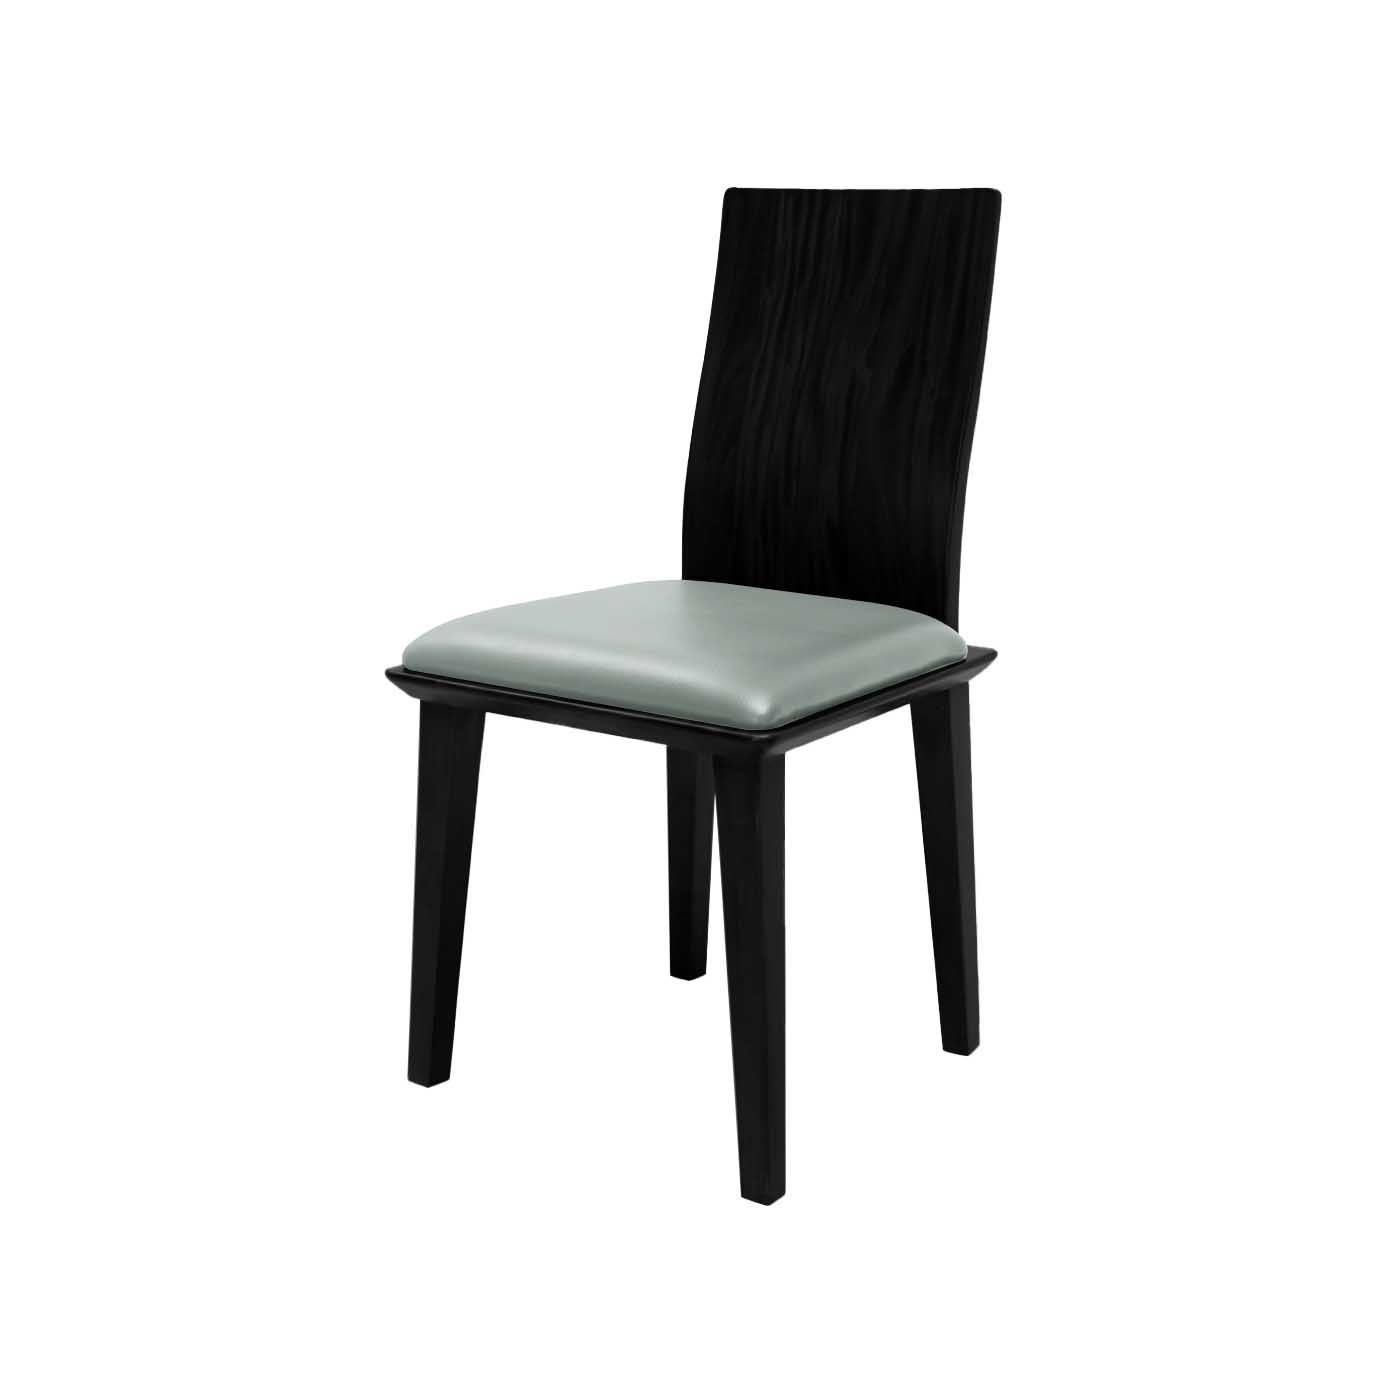 Muko Faux Leather Ebony Dining Chair